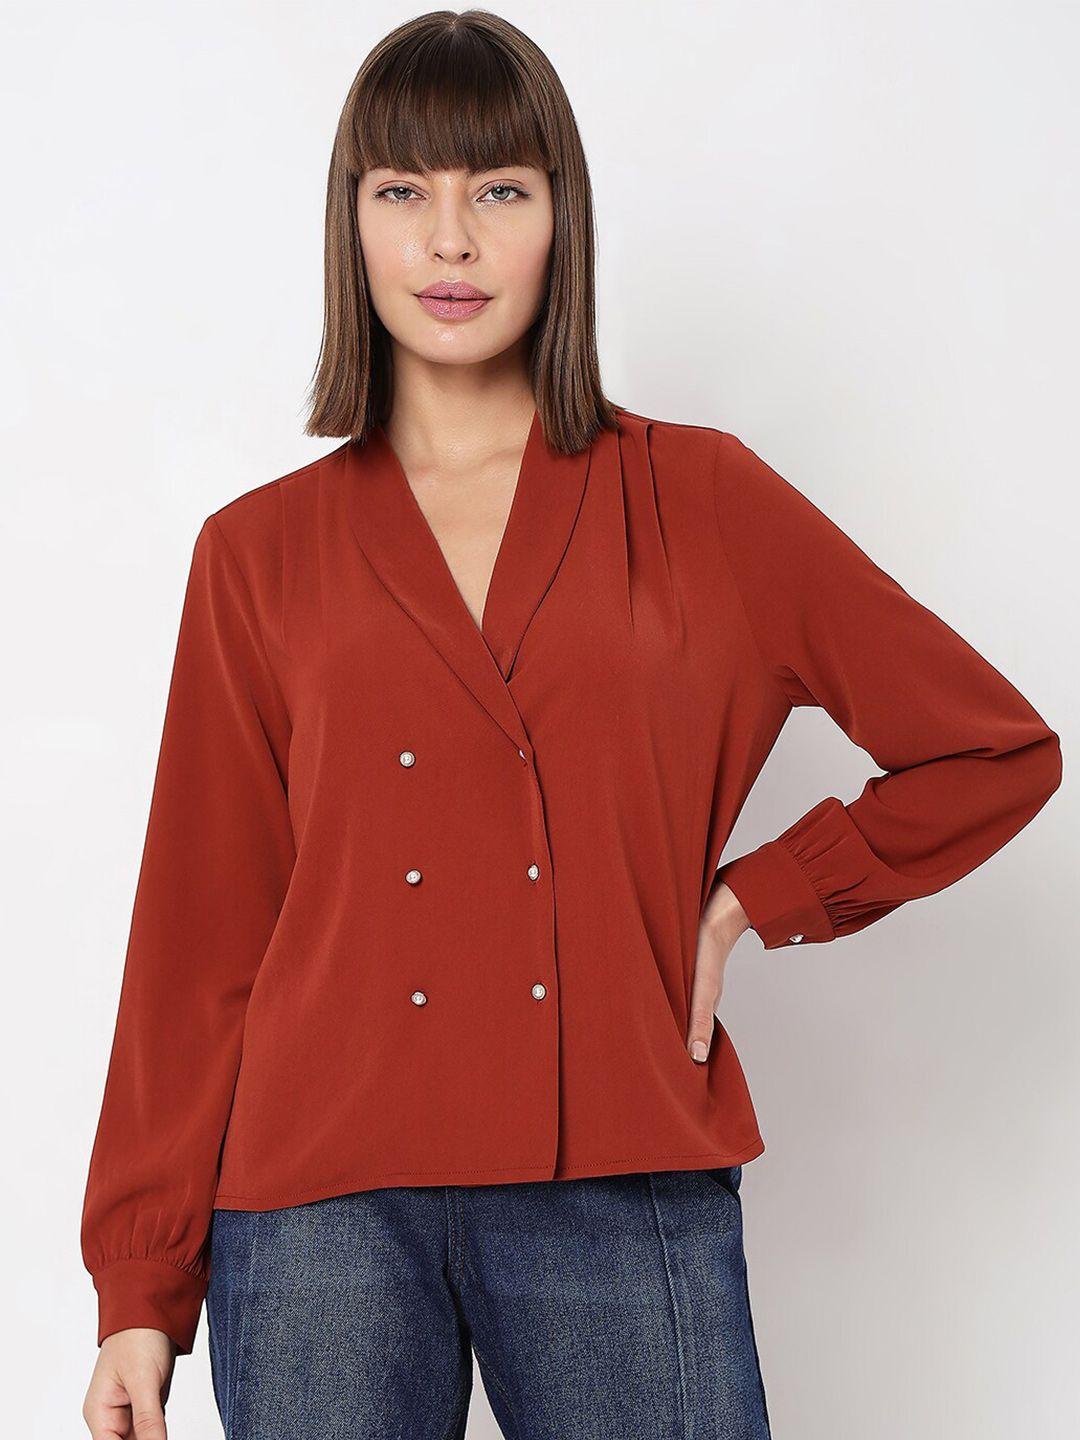 vero moda red roll-up sleeves wrap top